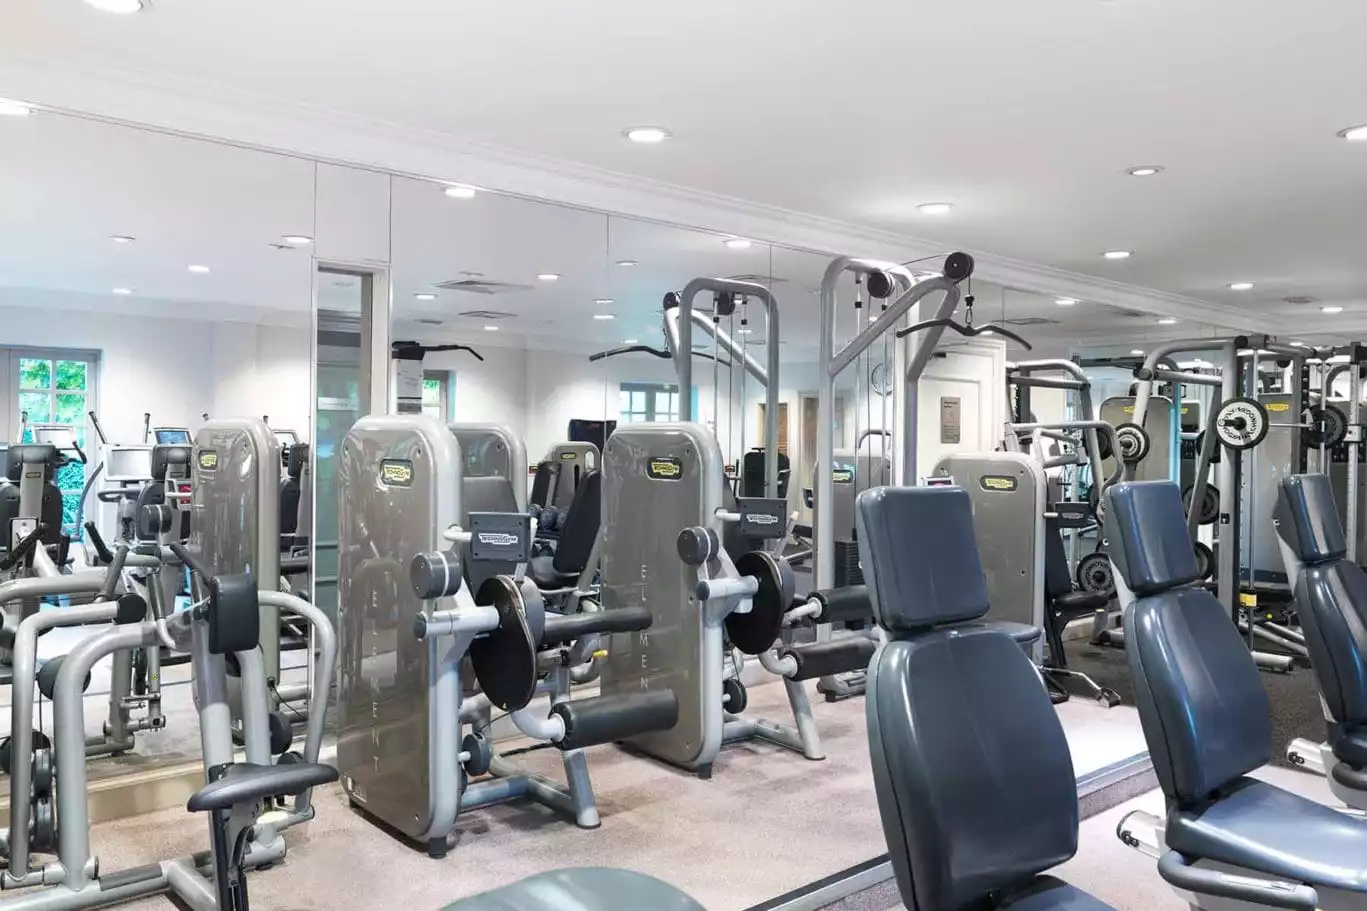 Gym equipment at The Runnymede on Thames